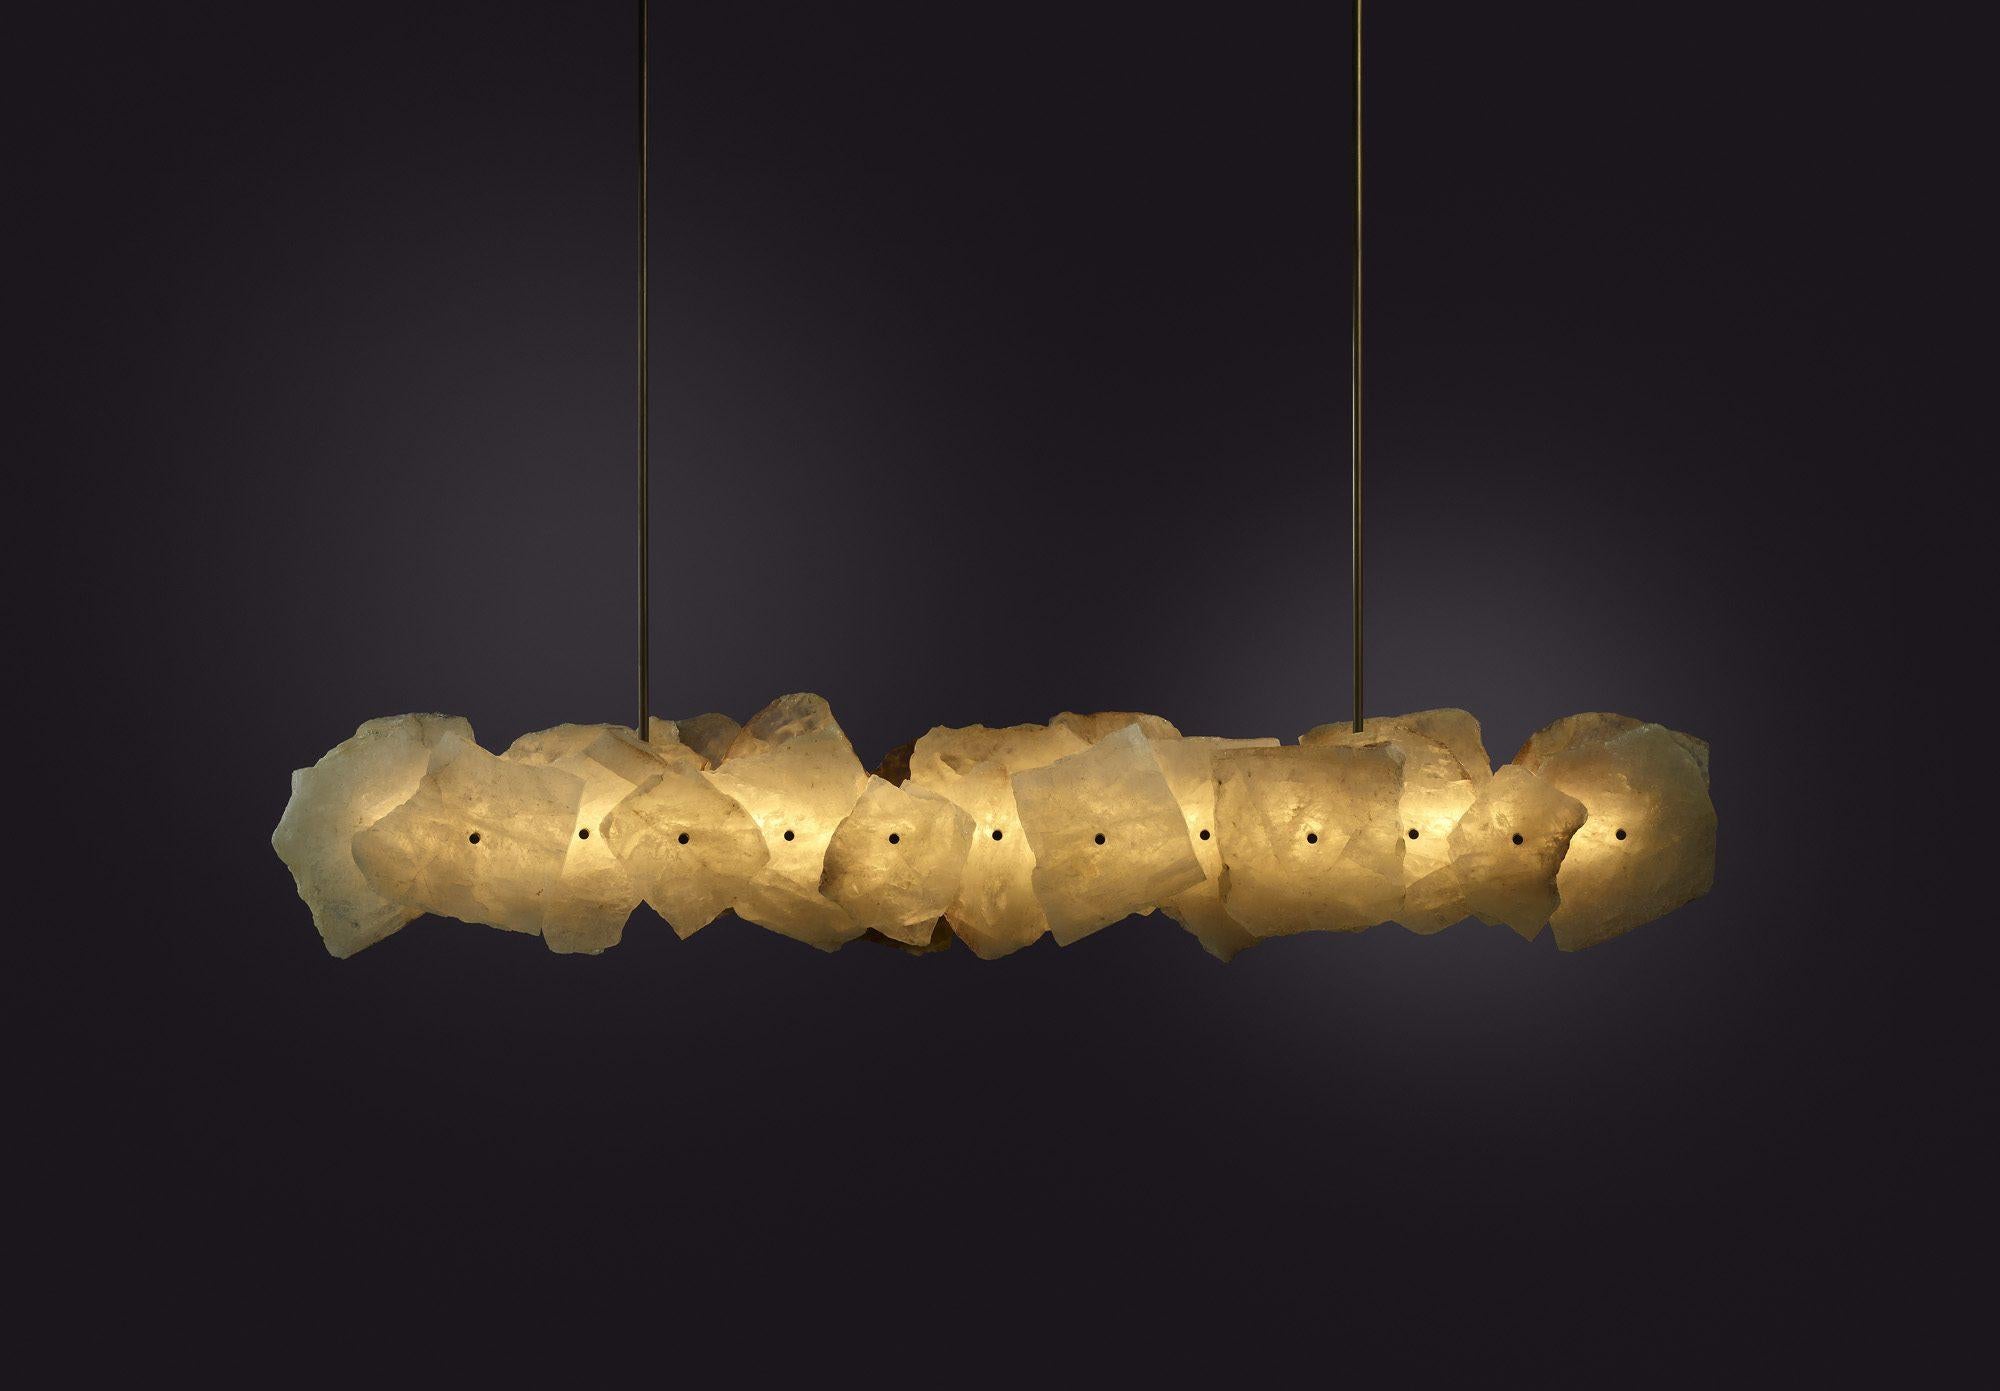 `Contemporary Pendant in Quartz Slices and Brass - Petra II Linear 900 by Christopher Boots

PETRA (from the Greek, meaning stone) celebrates the subtleties and complexities of quartz. Quartz was highly revered by the ancients who believed that it